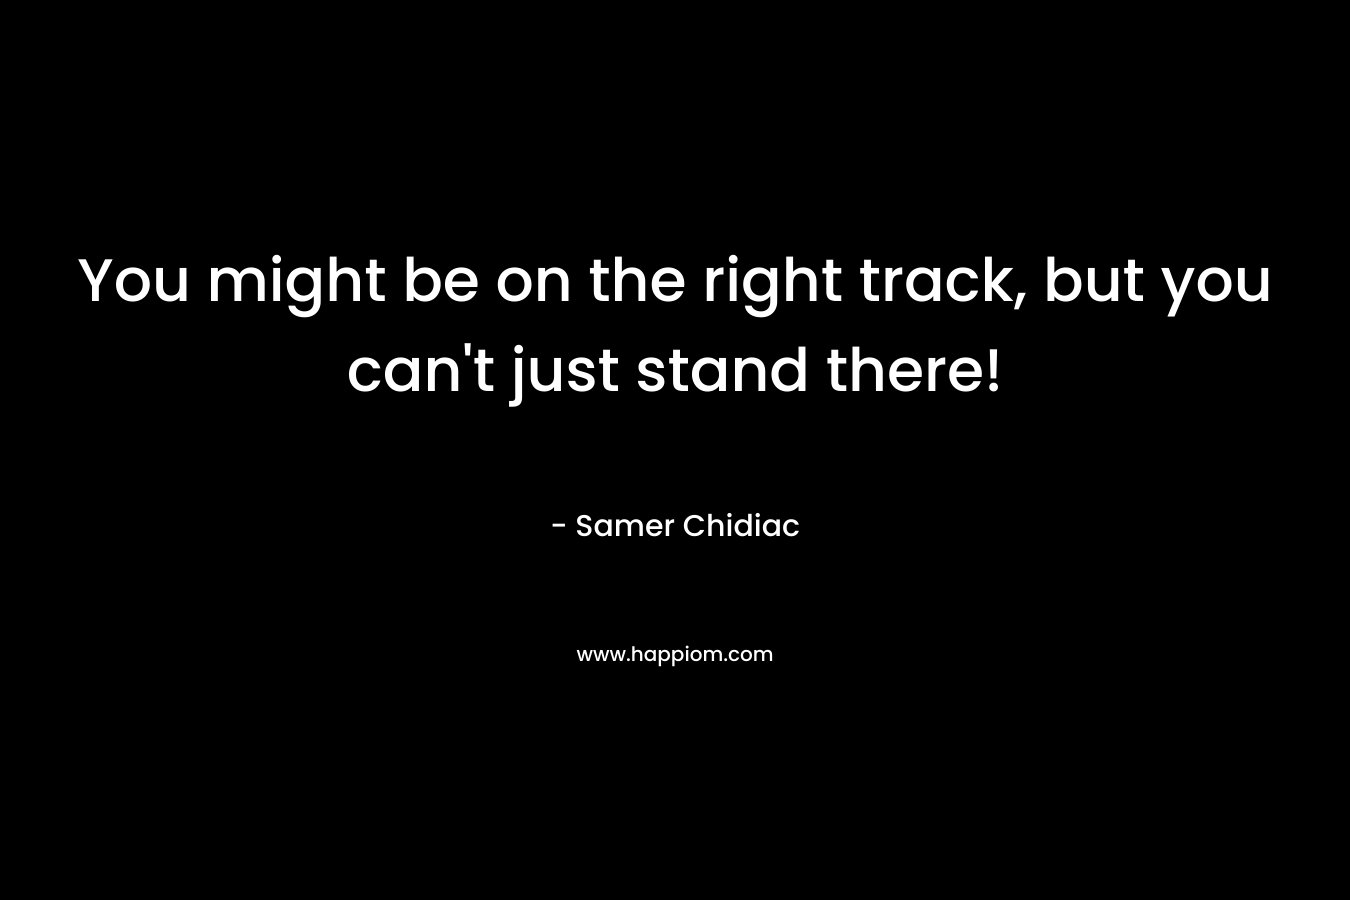 You might be on the right track, but you can't just stand there!